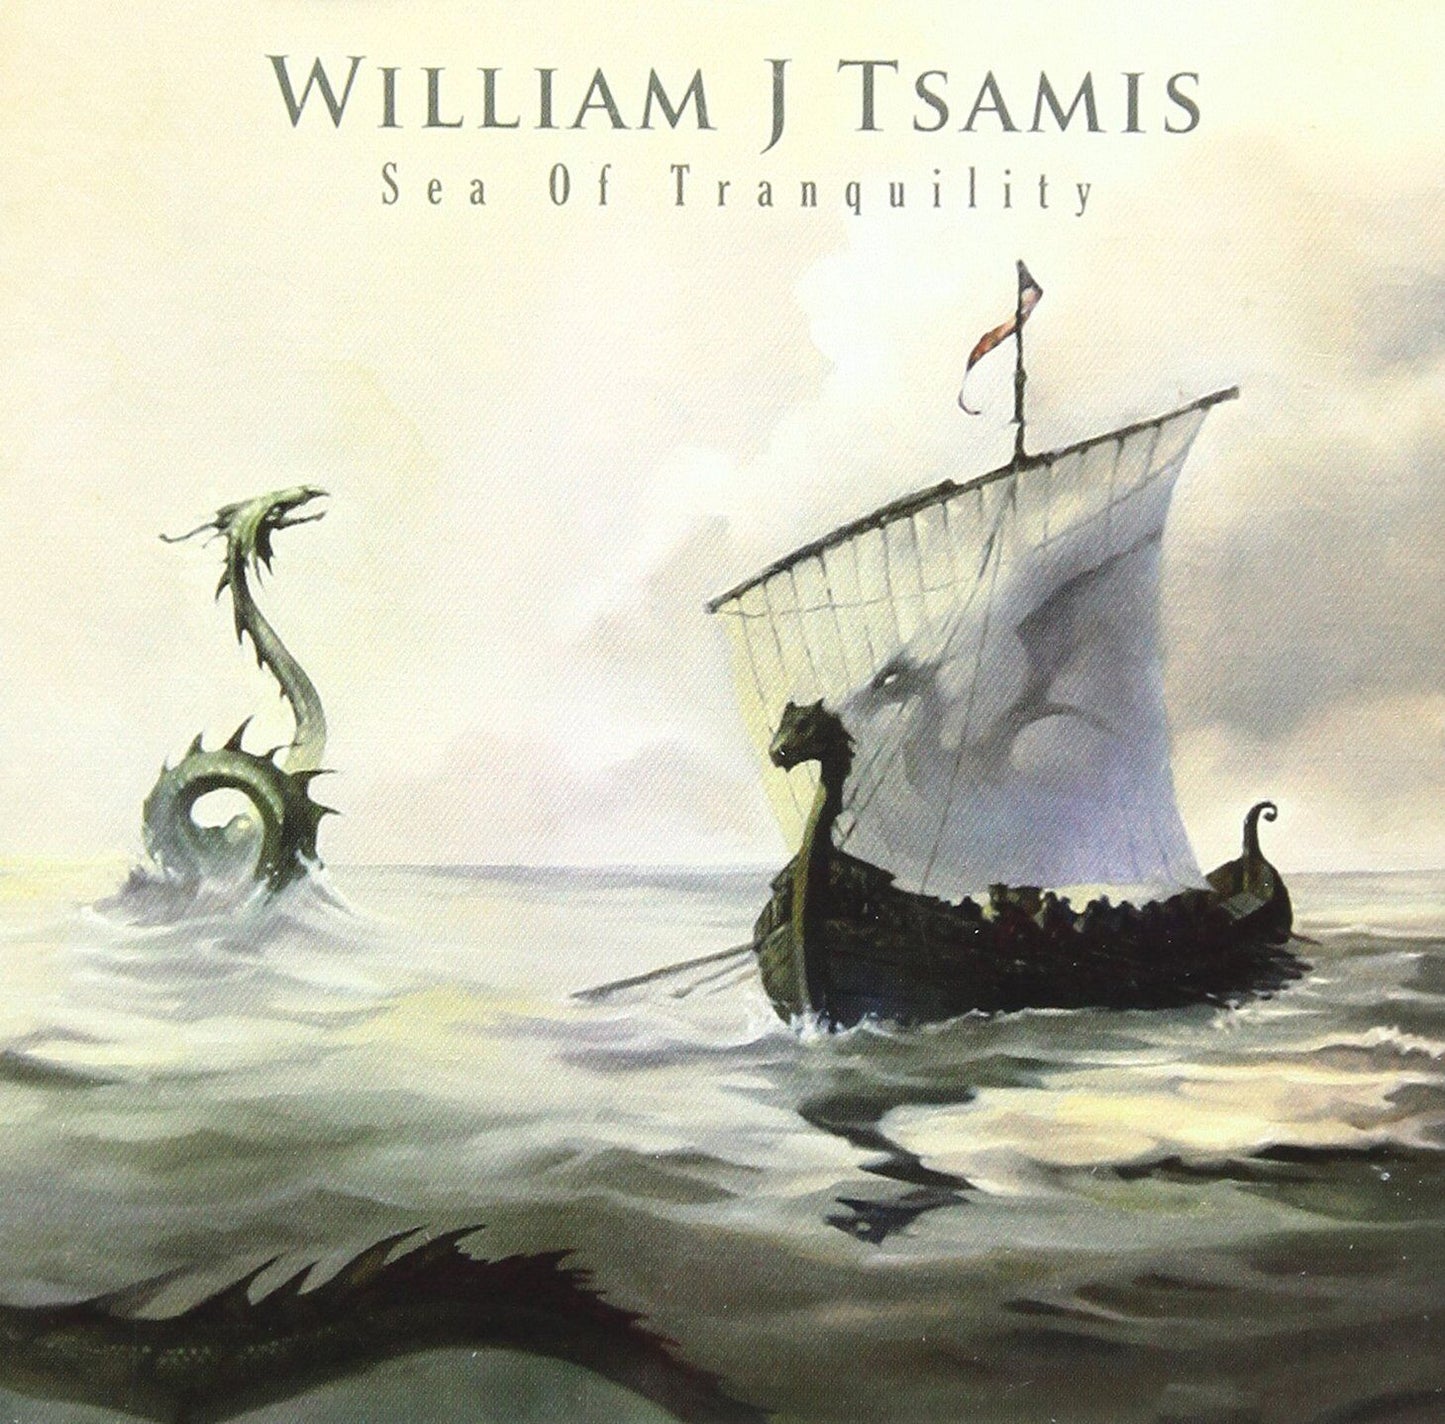 William T. Tsamis - Sea of Tranquility CD 2012 Warlord OVP Sealed No Remorse Rec